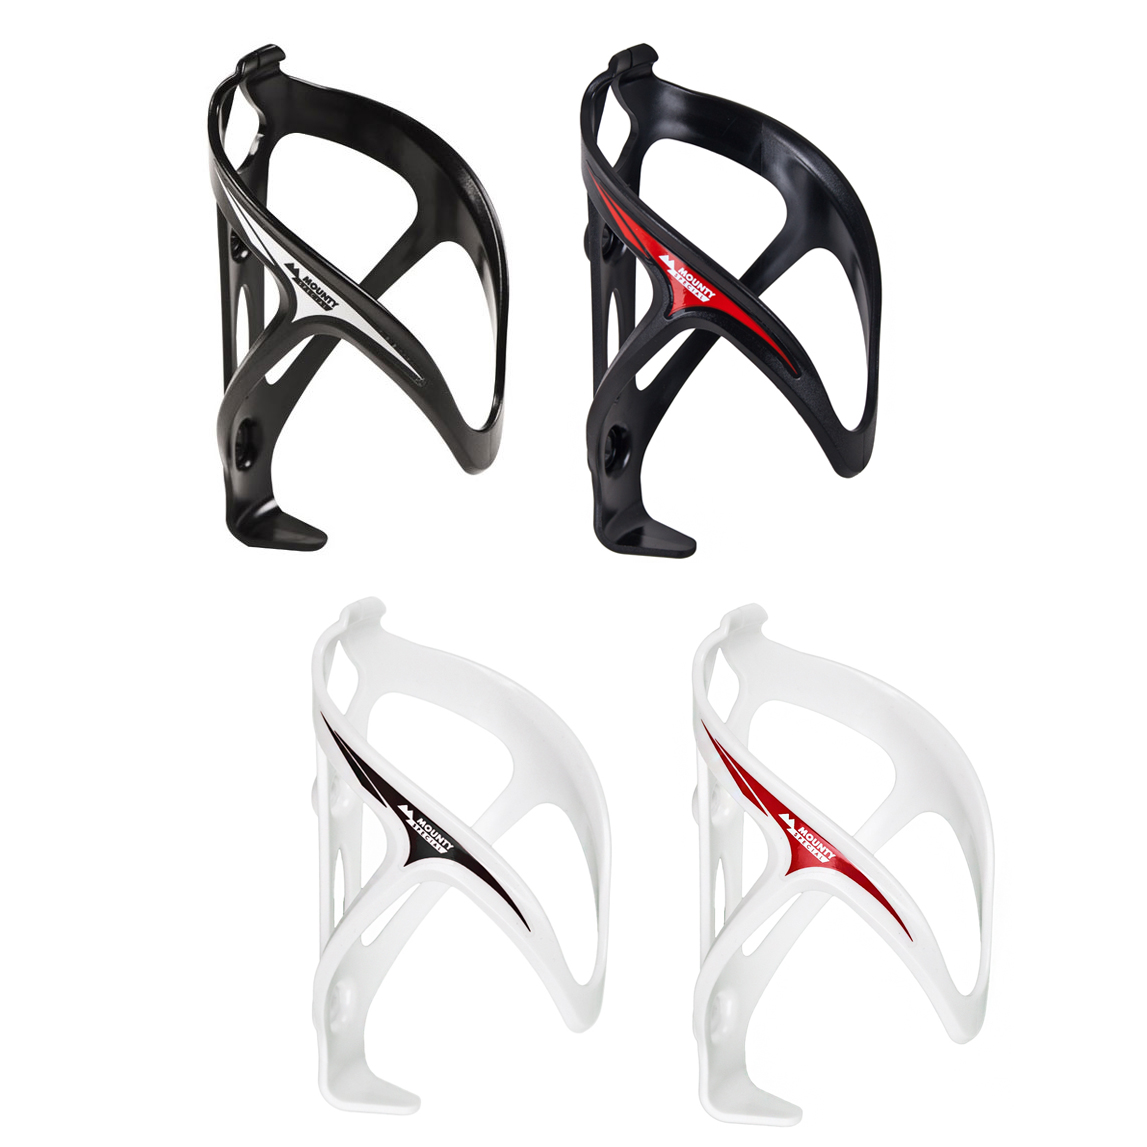 Productfoto van Mounty Special Race-Cage Bottle Cage